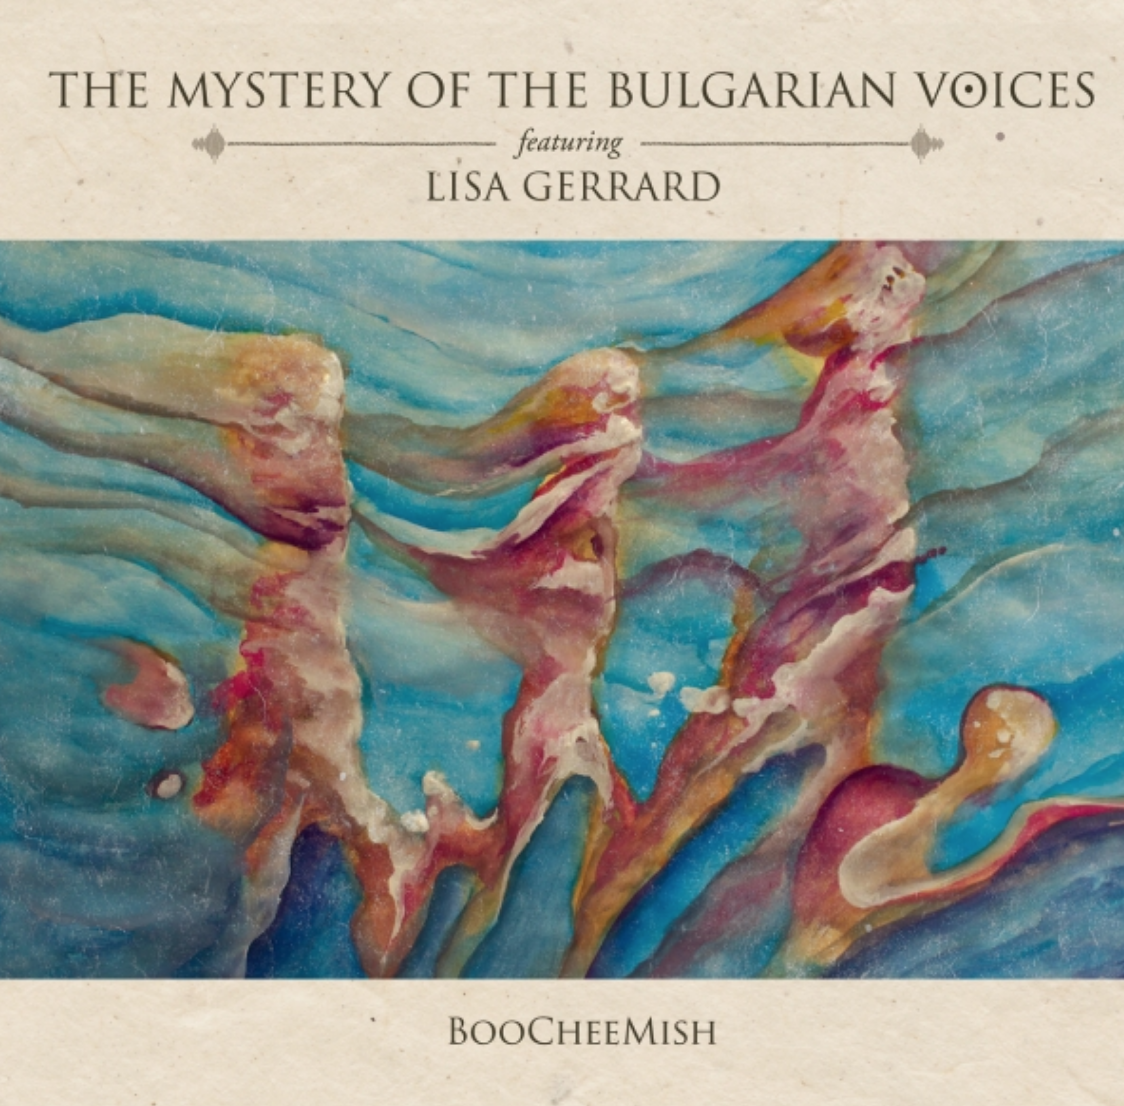 THE MYSTERY OF THE BULGARIAN VOICES